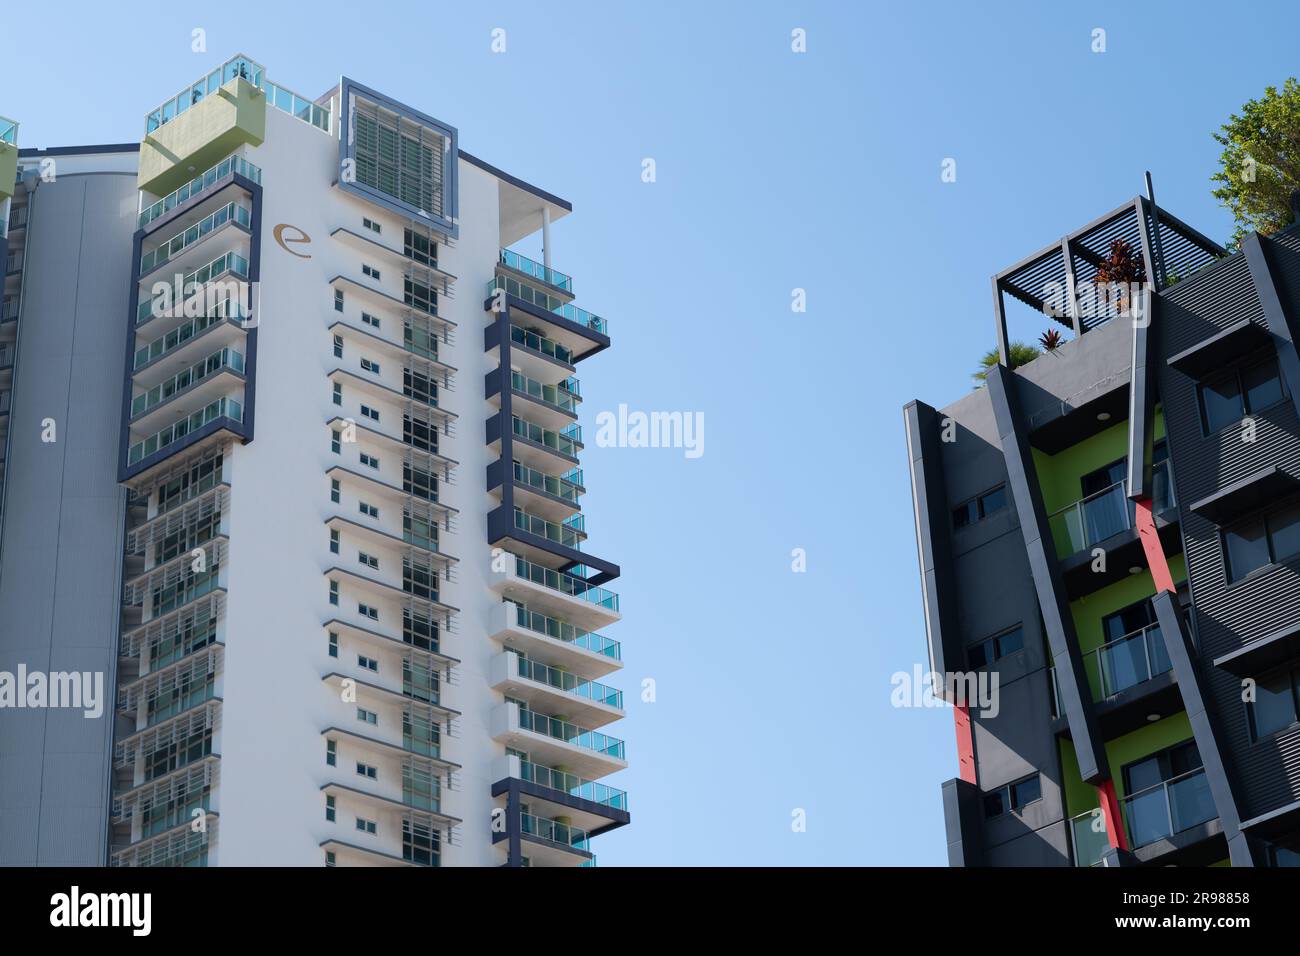 A photograph of two high-rise buildings emphasizing different exterior decoration design, and the air space between them. Stock Photo